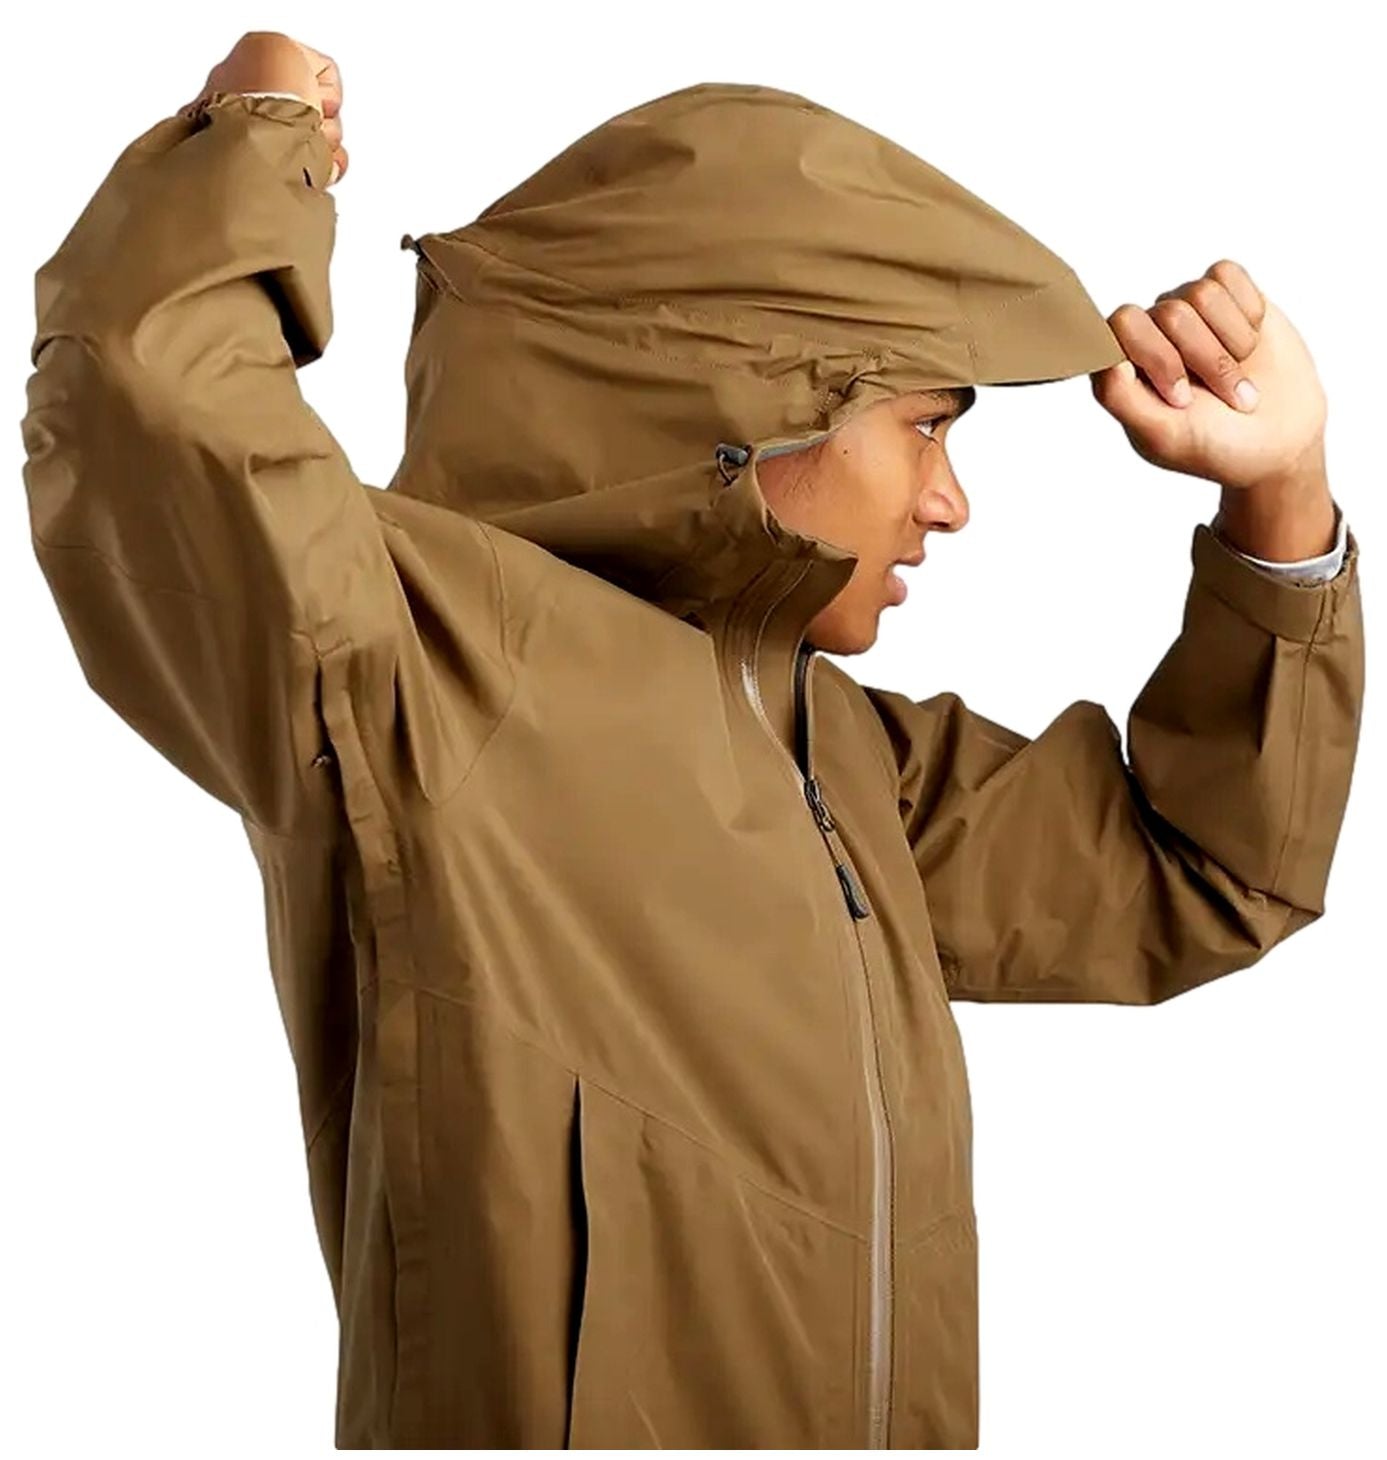 Outdoor Research Foray Jacket - Men's